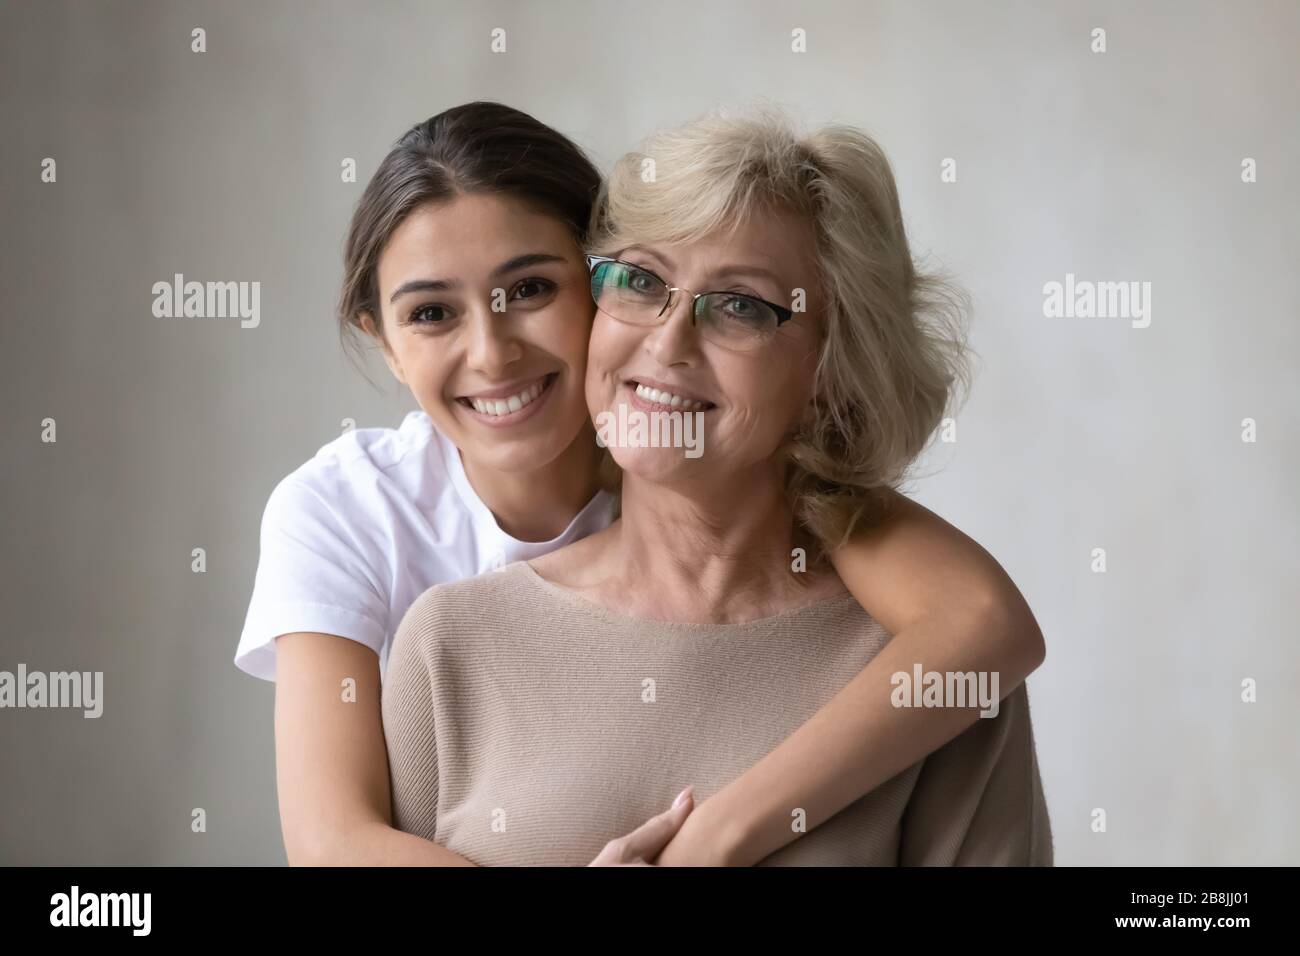 Smiling middle-aged mother and adult daughter hugging Stock Photo